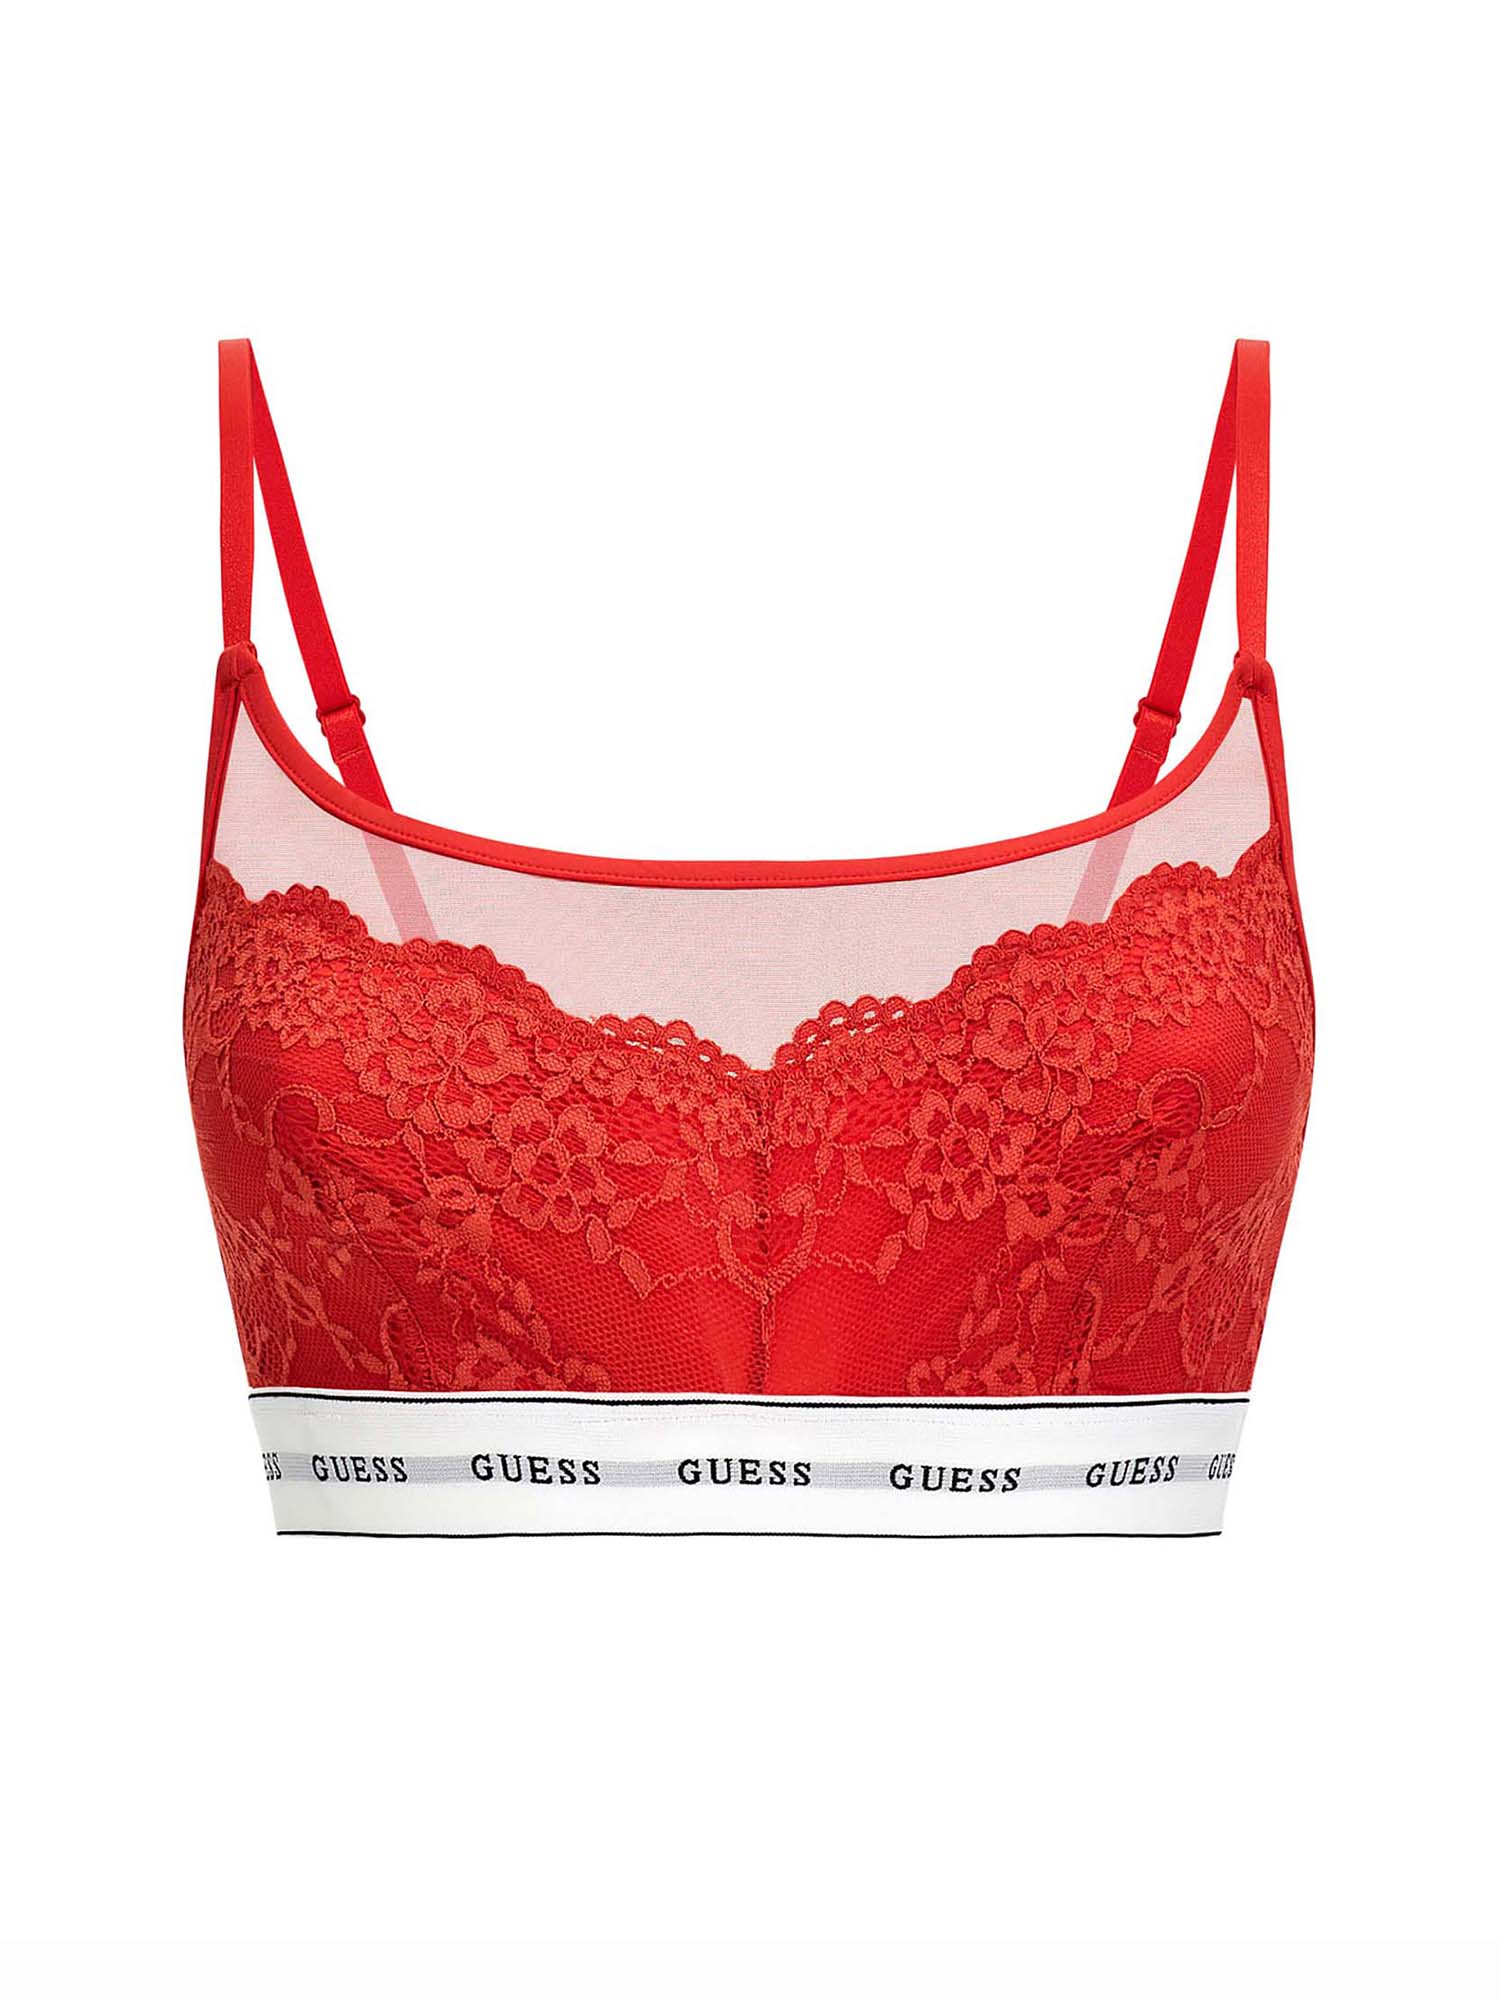 BRALETTE DONNA - GUESS UNDERWEAR - O2BC07 KBBT0 - ROSSO, XS